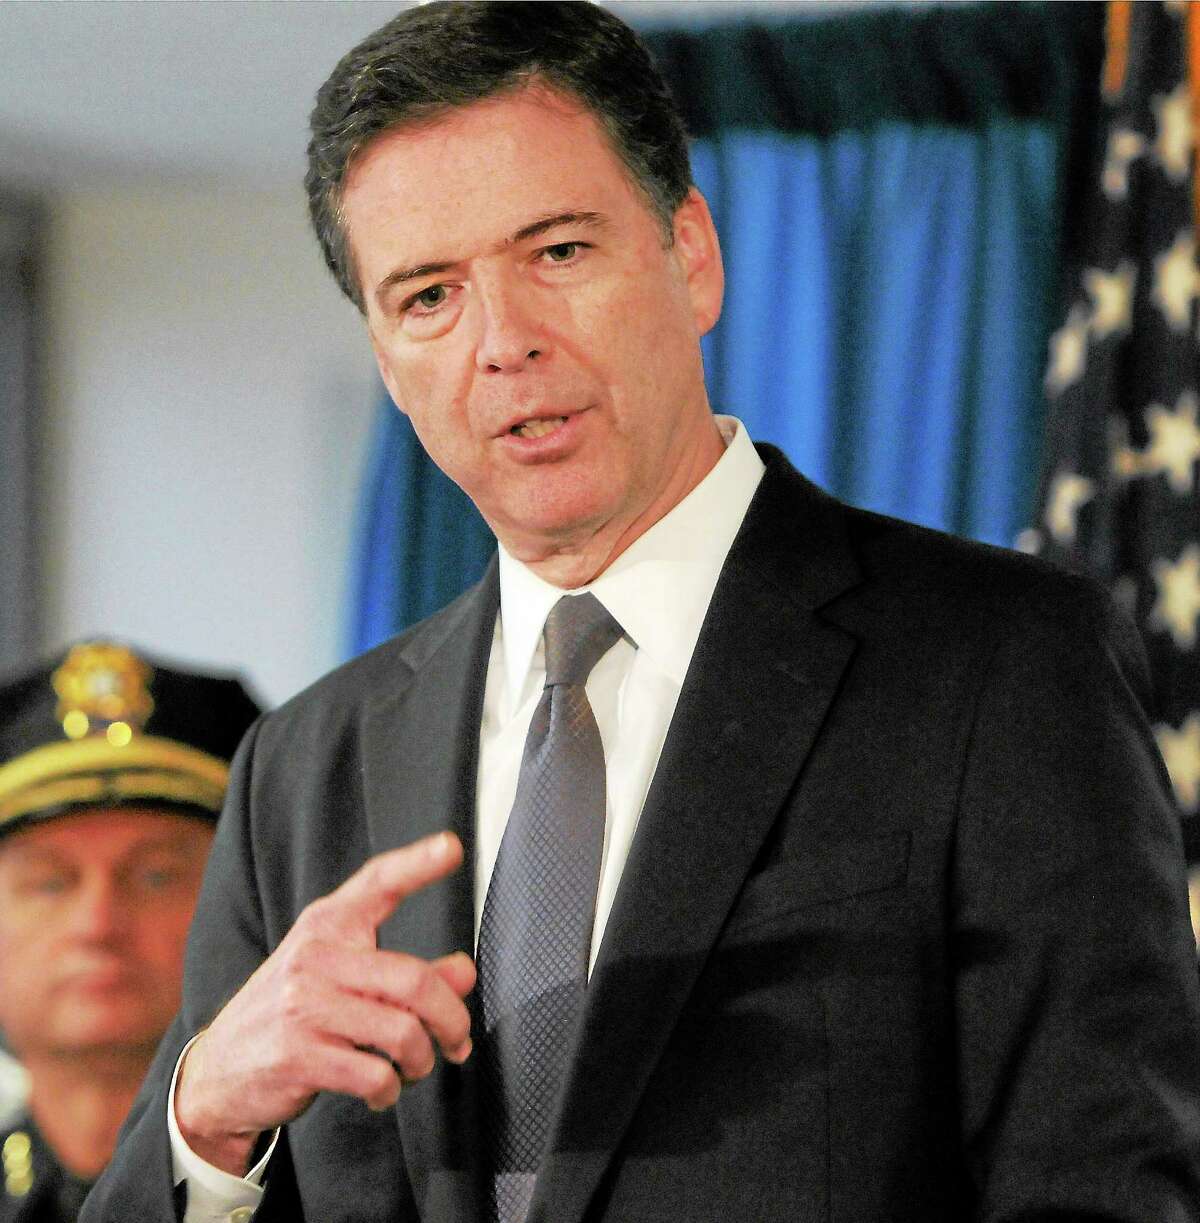 FBI Director James Comey answers questions at a press conference during a December 2013 visit to the New Haven FBI Field Office and with Police Chief in Connecticut and the Connecticut State Police.